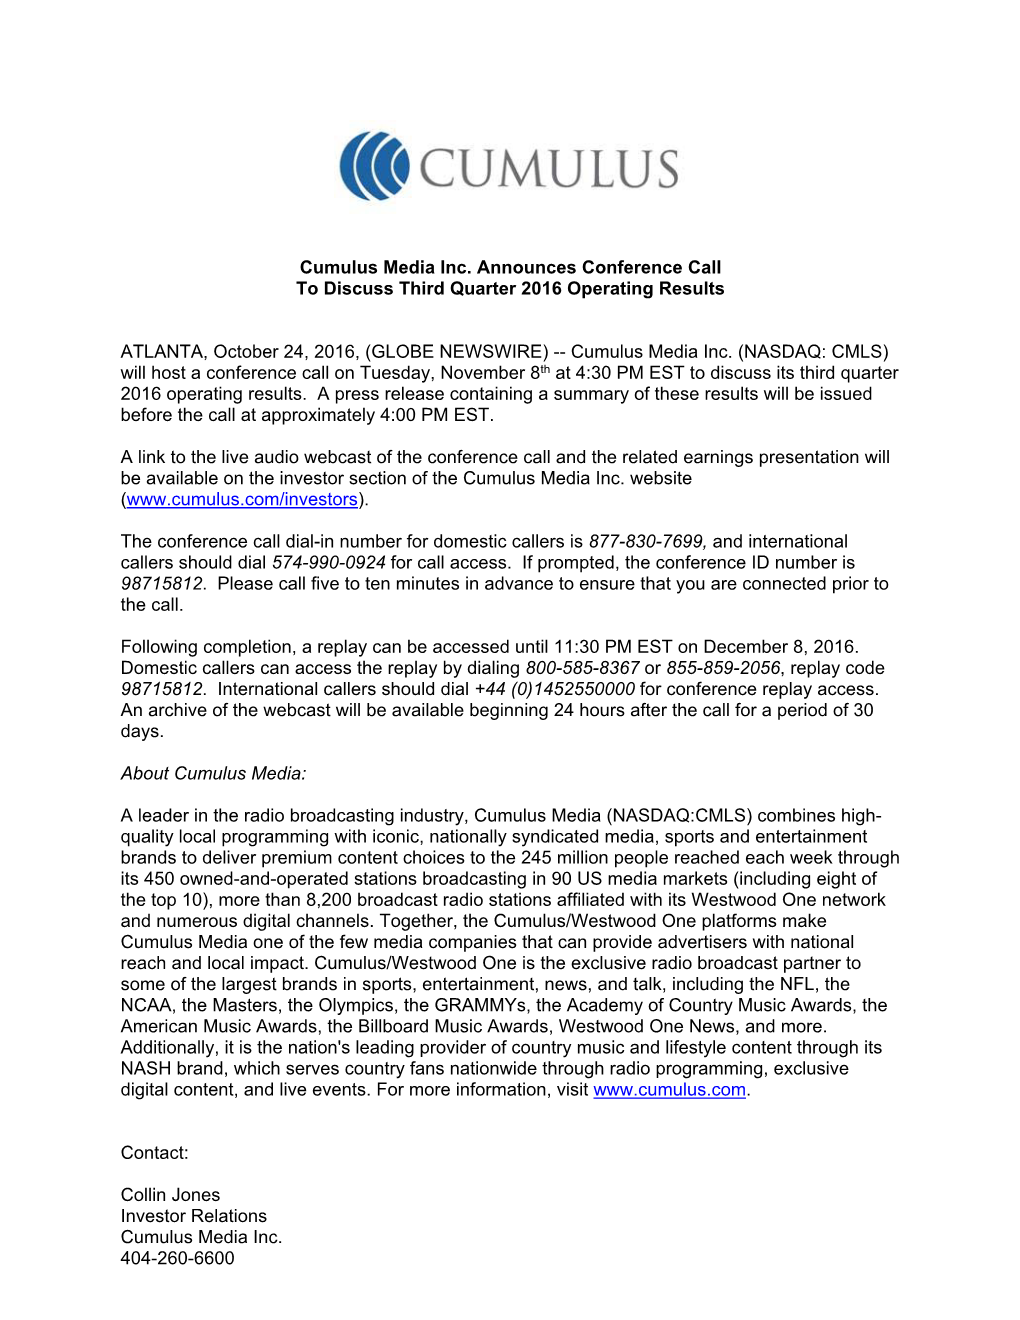 Cumulus Media Inc. Announces Conference Call to Discuss Third Quarter 2016 Operating Results